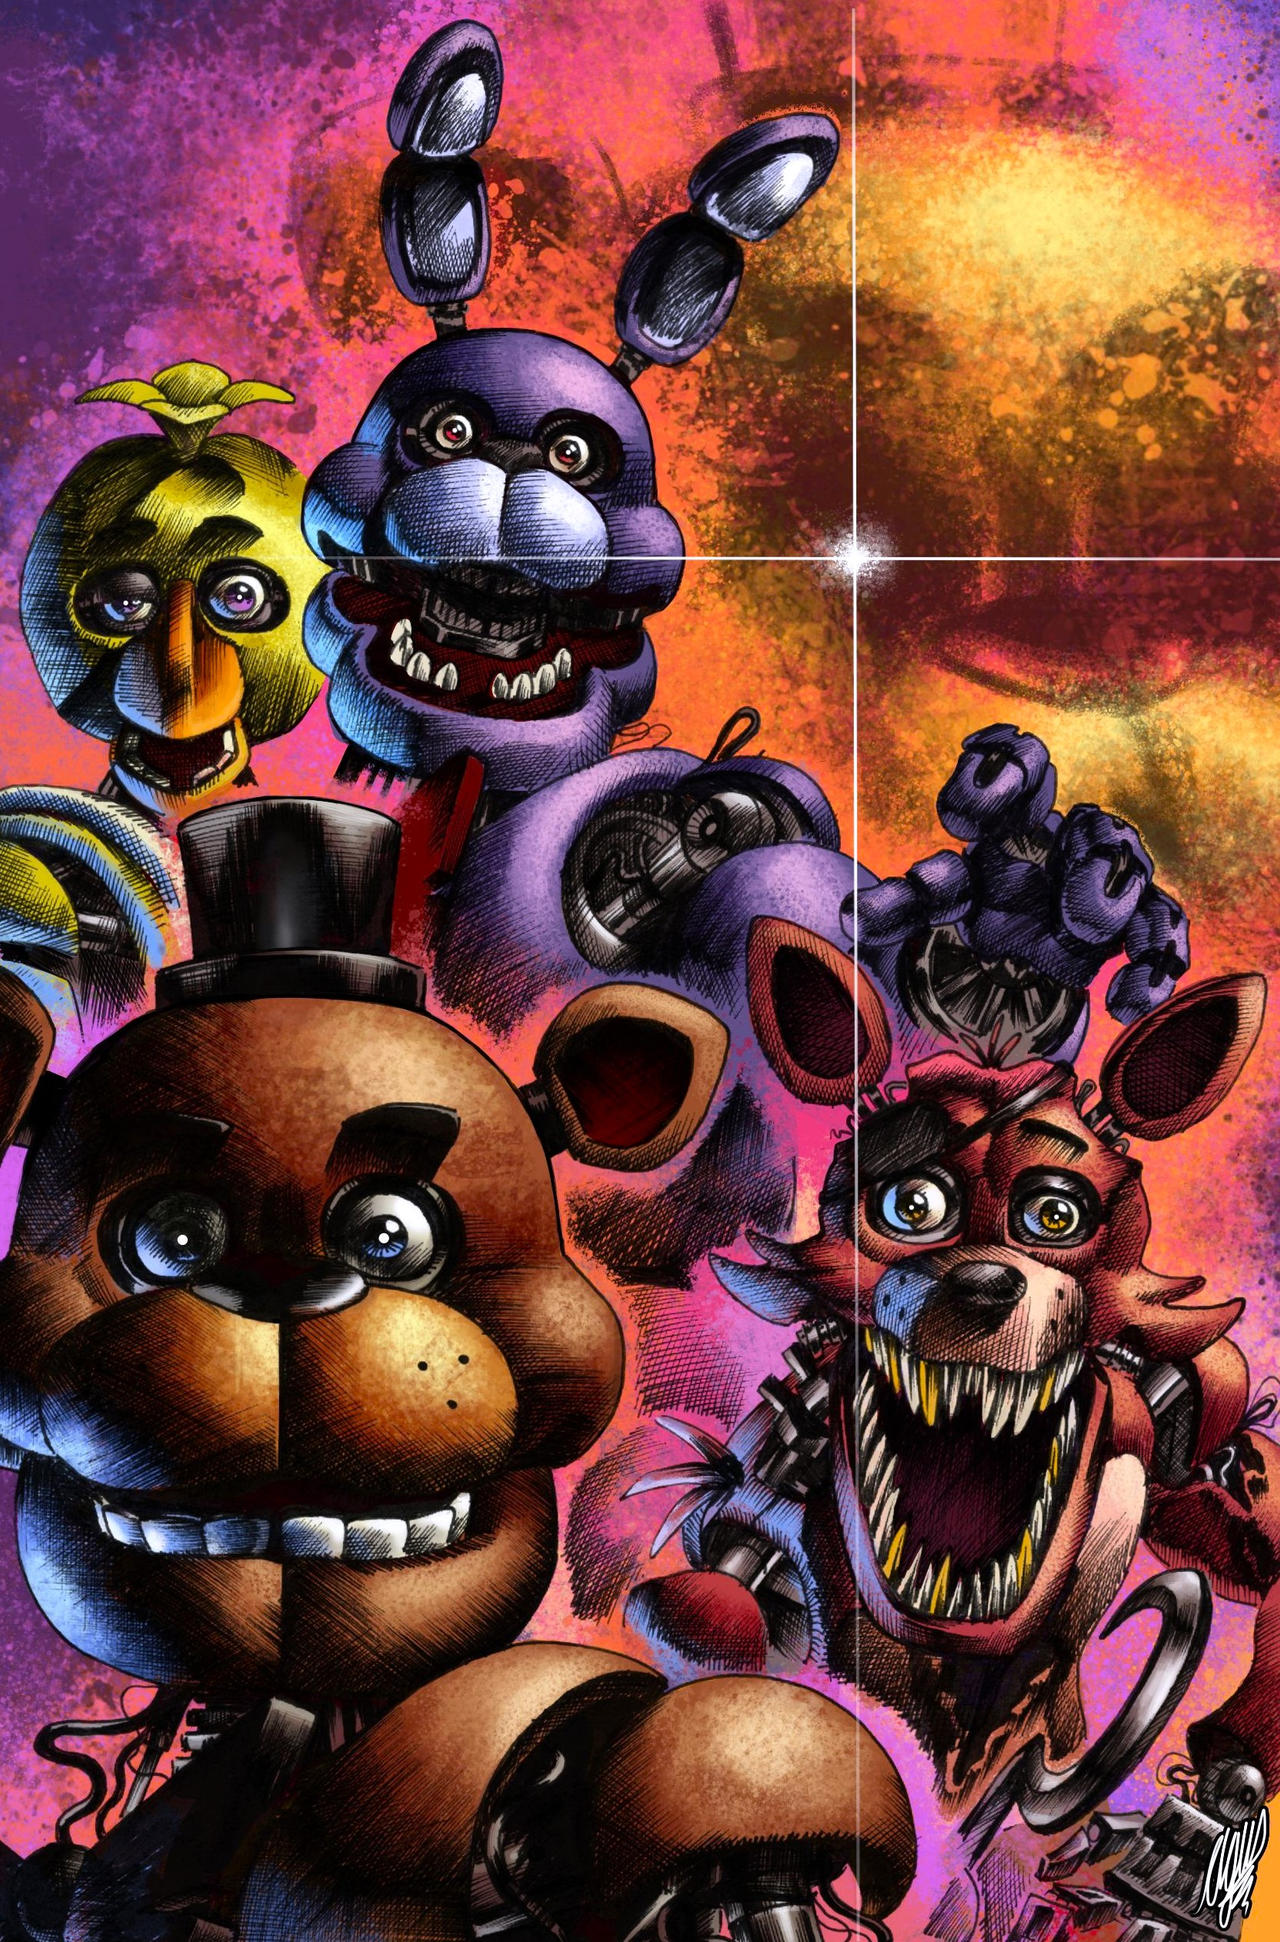 FNaF:SB / Ruin] Heir of the Hare pt.1 by BarBADroid on DeviantArt